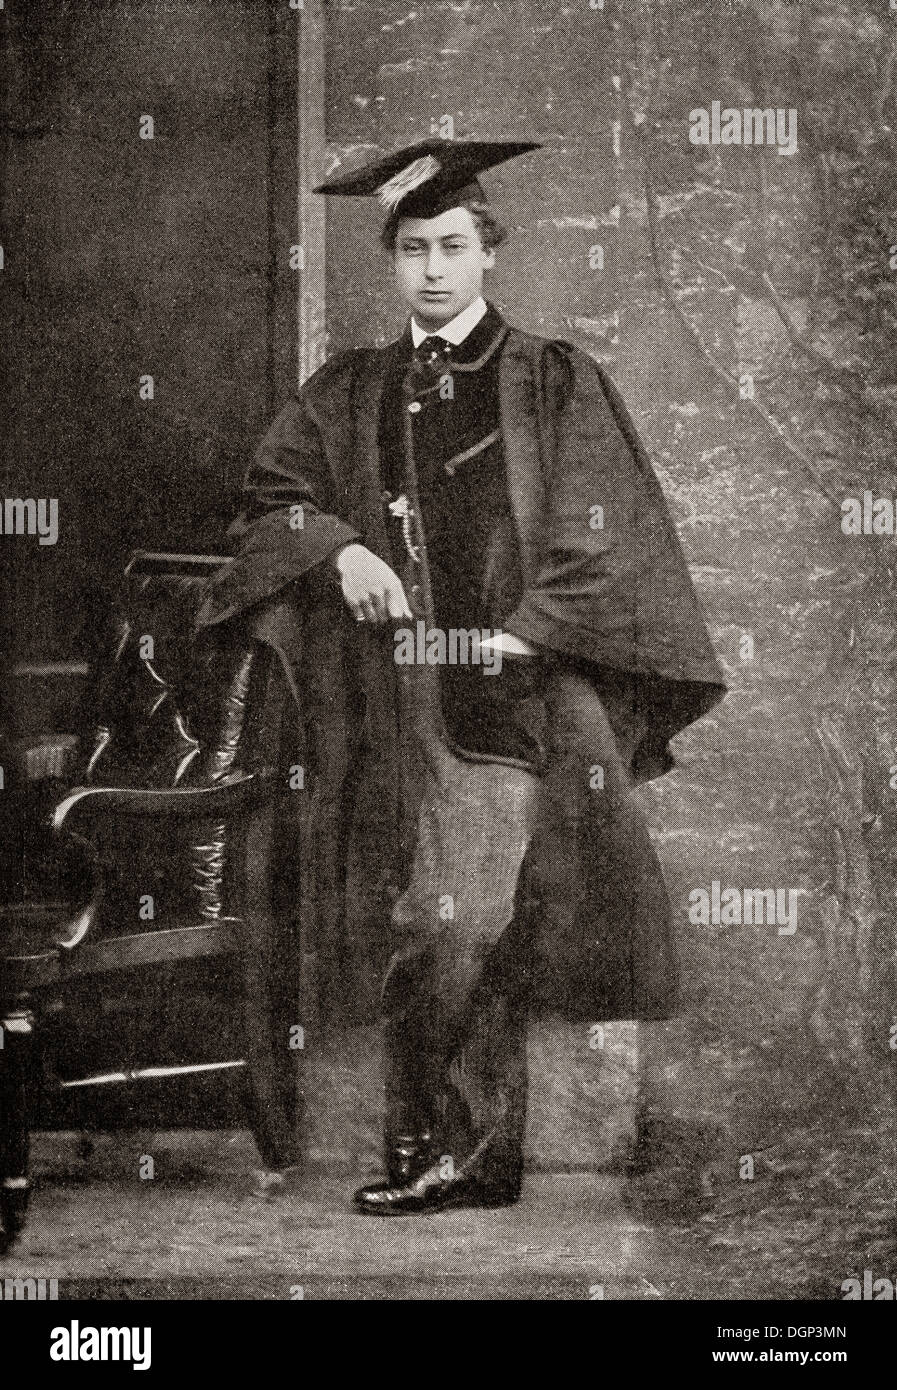 Albert Edward, Prince of Wales, 1841 – 1910, future King Edward VII, seen here as an undergraduate at Oxford. Stock Photo